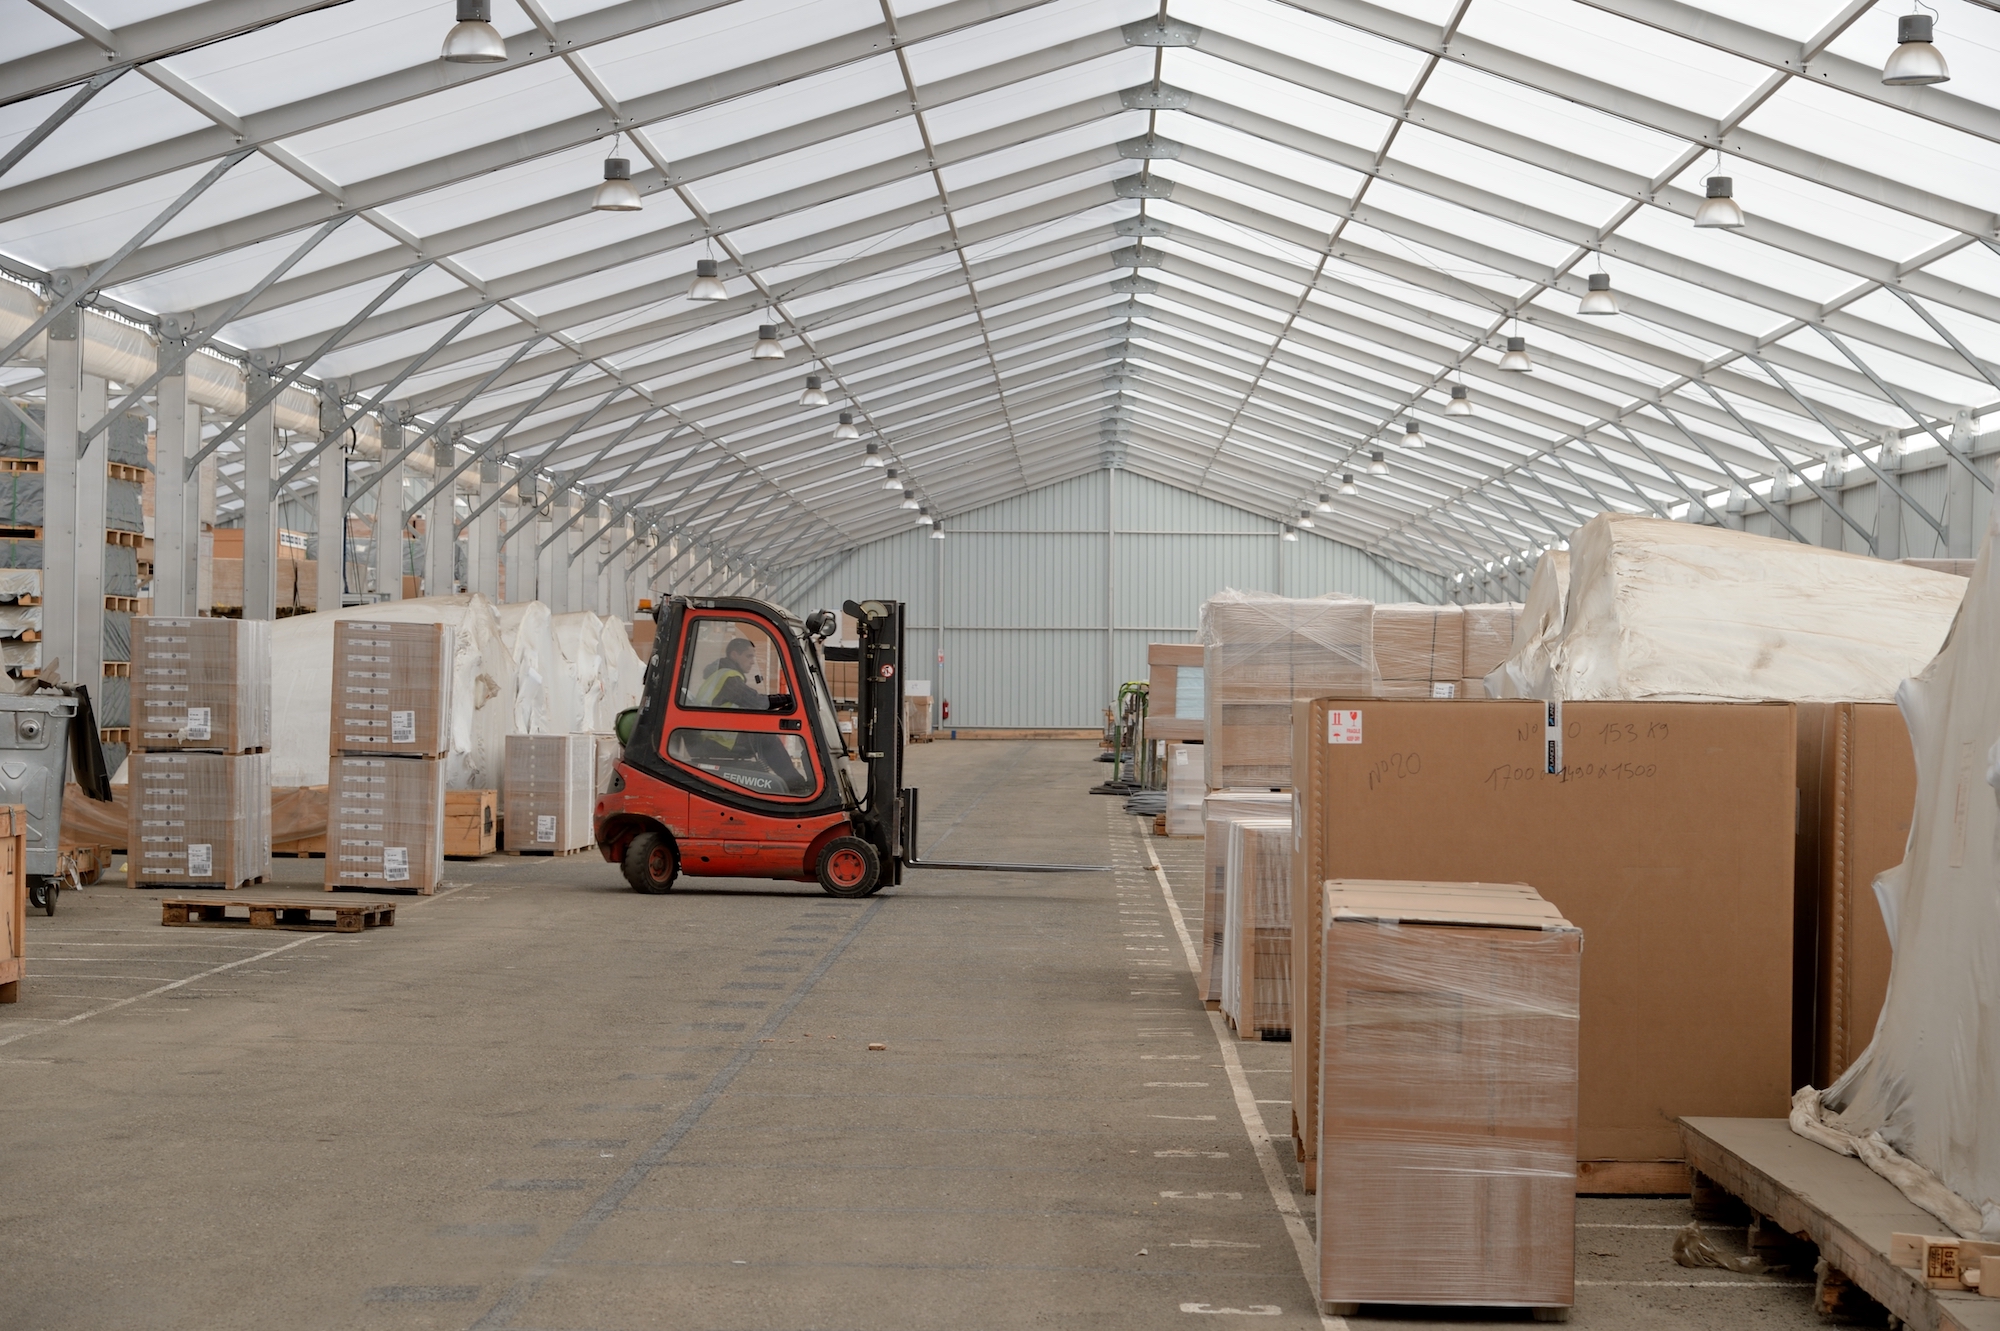 Lauralu temporary warehouse buildings and loading bay canopy forklift operation